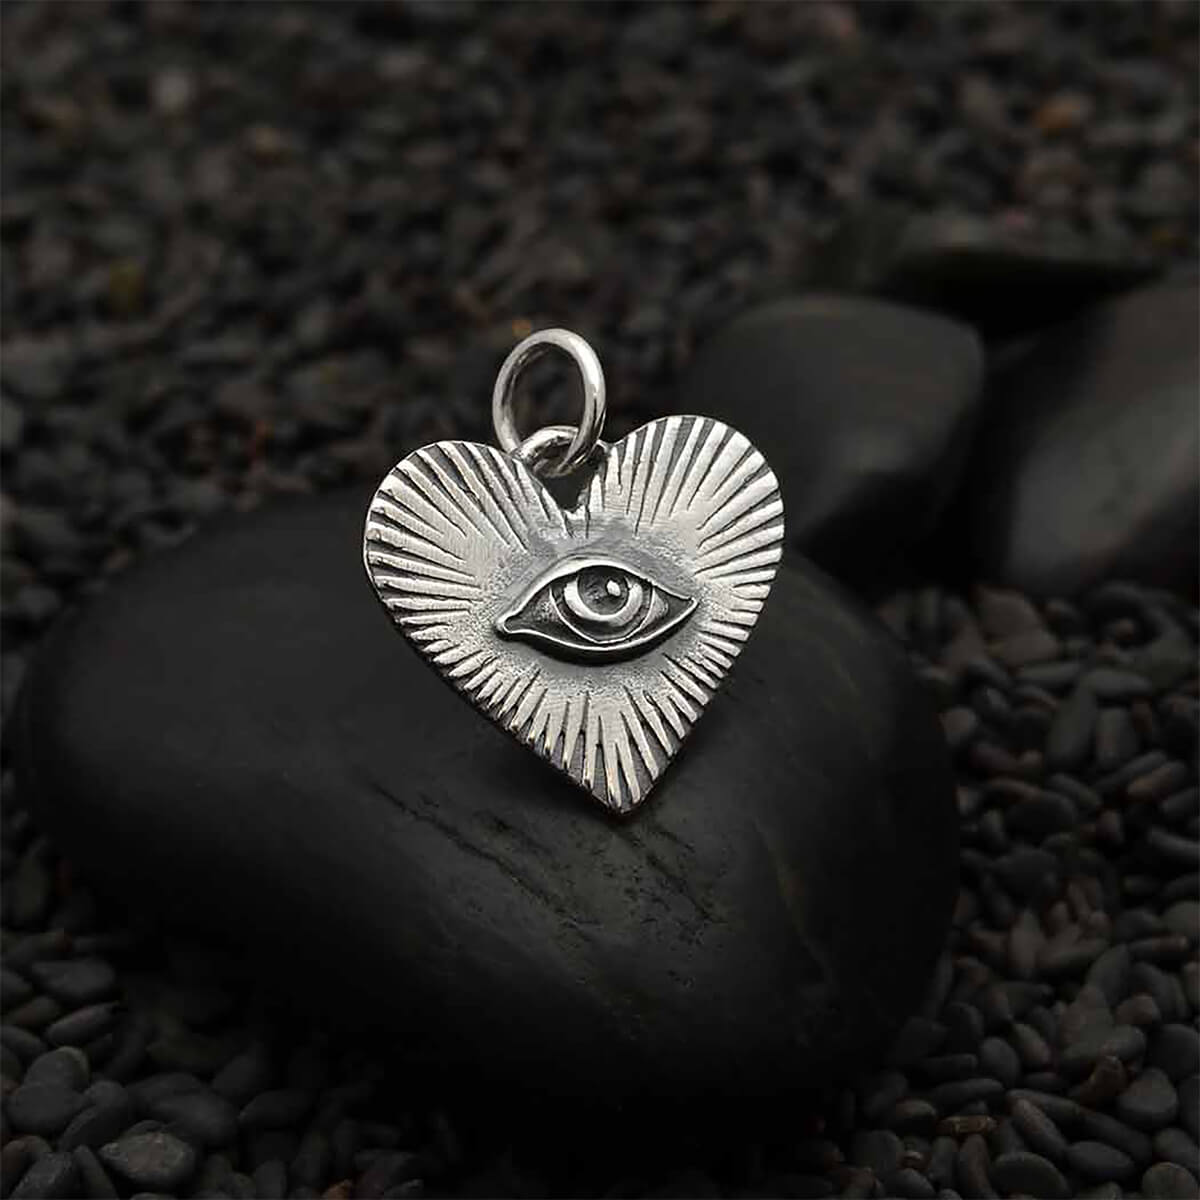 High quality heart charm with central eye and radial design sterling silver pendant